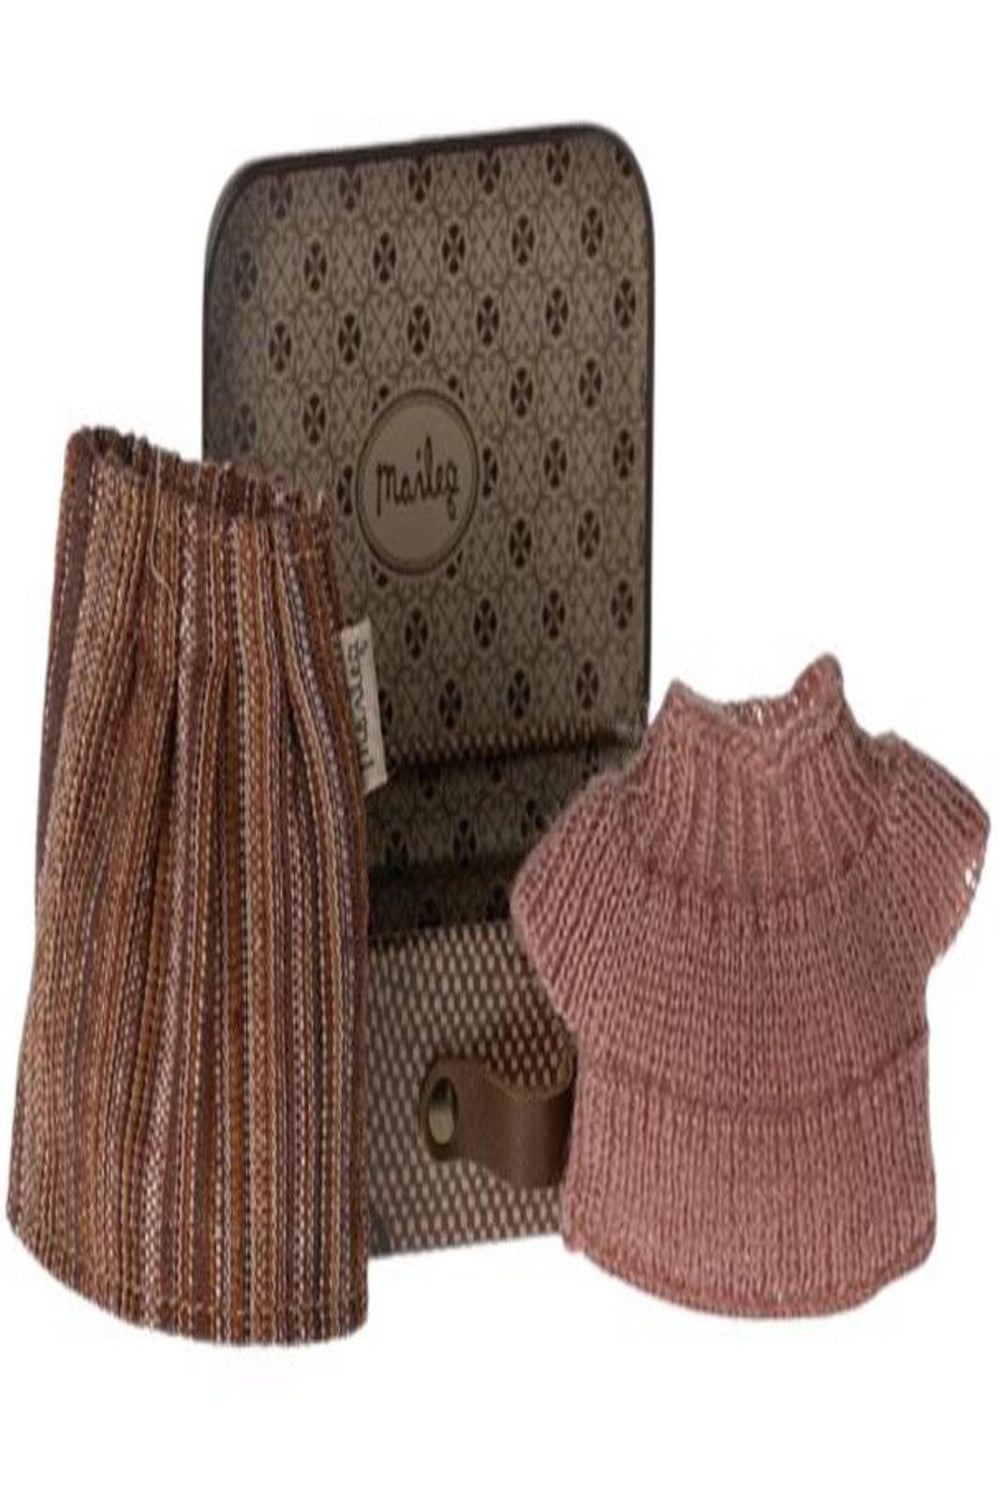 Maileg - Knitted Blouse And Skirt In Suitcase, Grandma Mouse Legetøj 